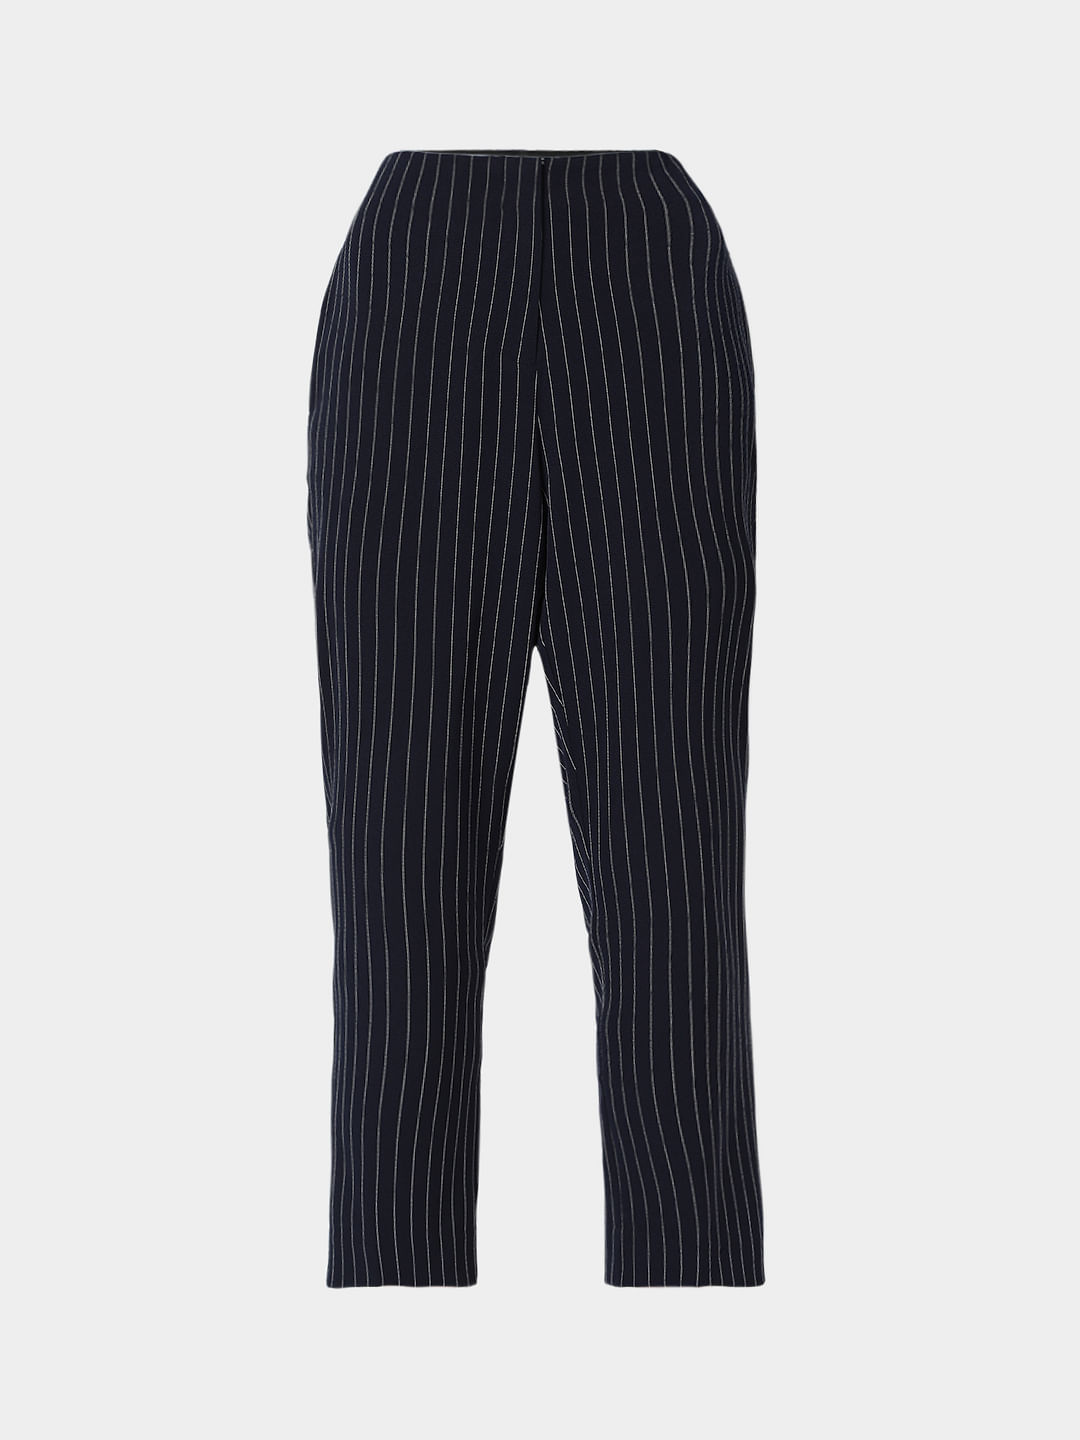 Buy Navy Blue Mid Rise Striped Pants For Women Online in India | VeroModa